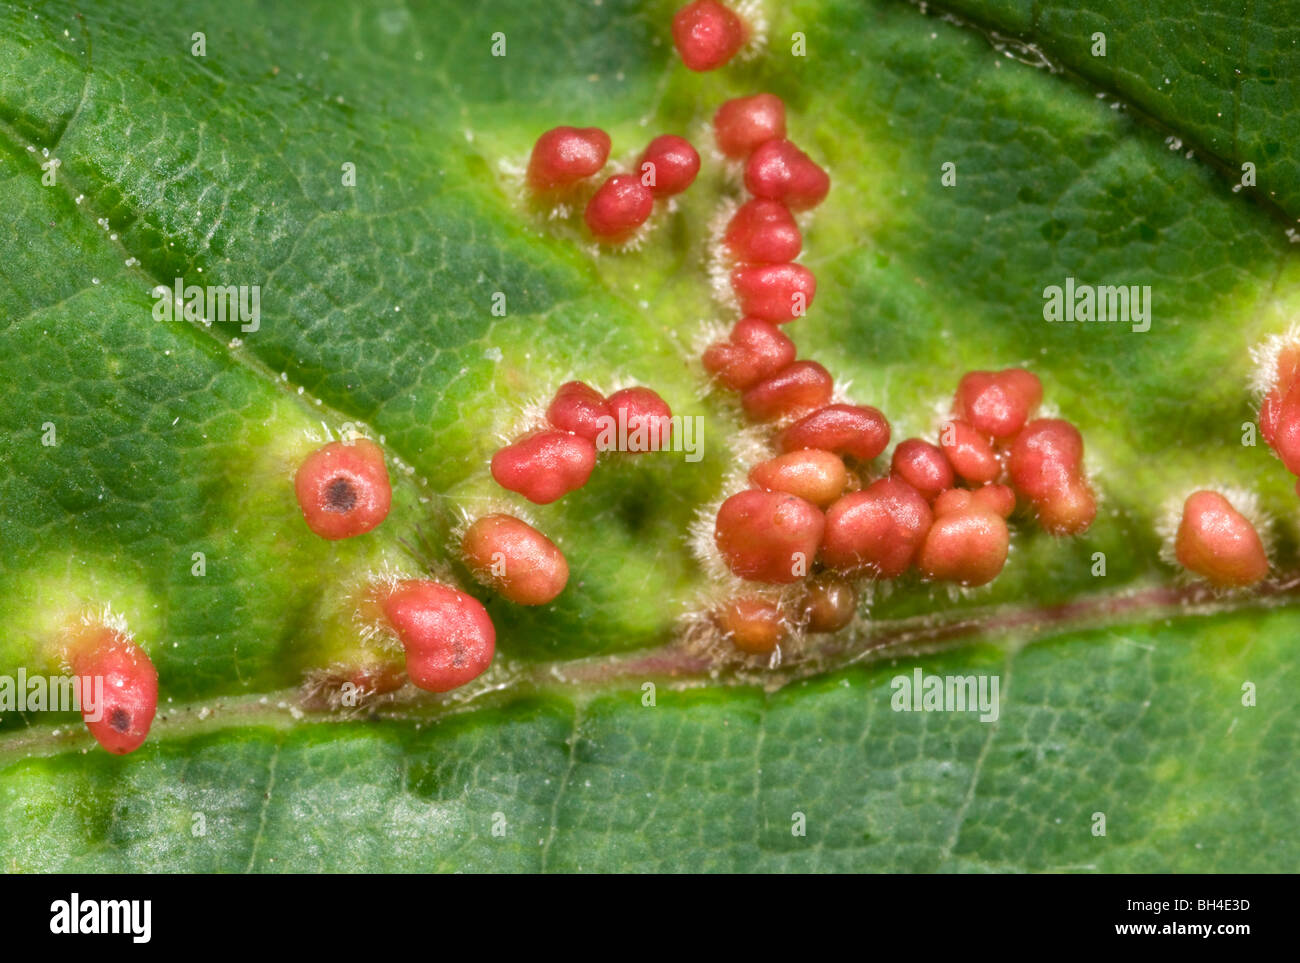 Macro image of sycamore mite galls attached to a sycamore leaf, caused by gall mite (Aulodes cephaloneus). Stock Photo